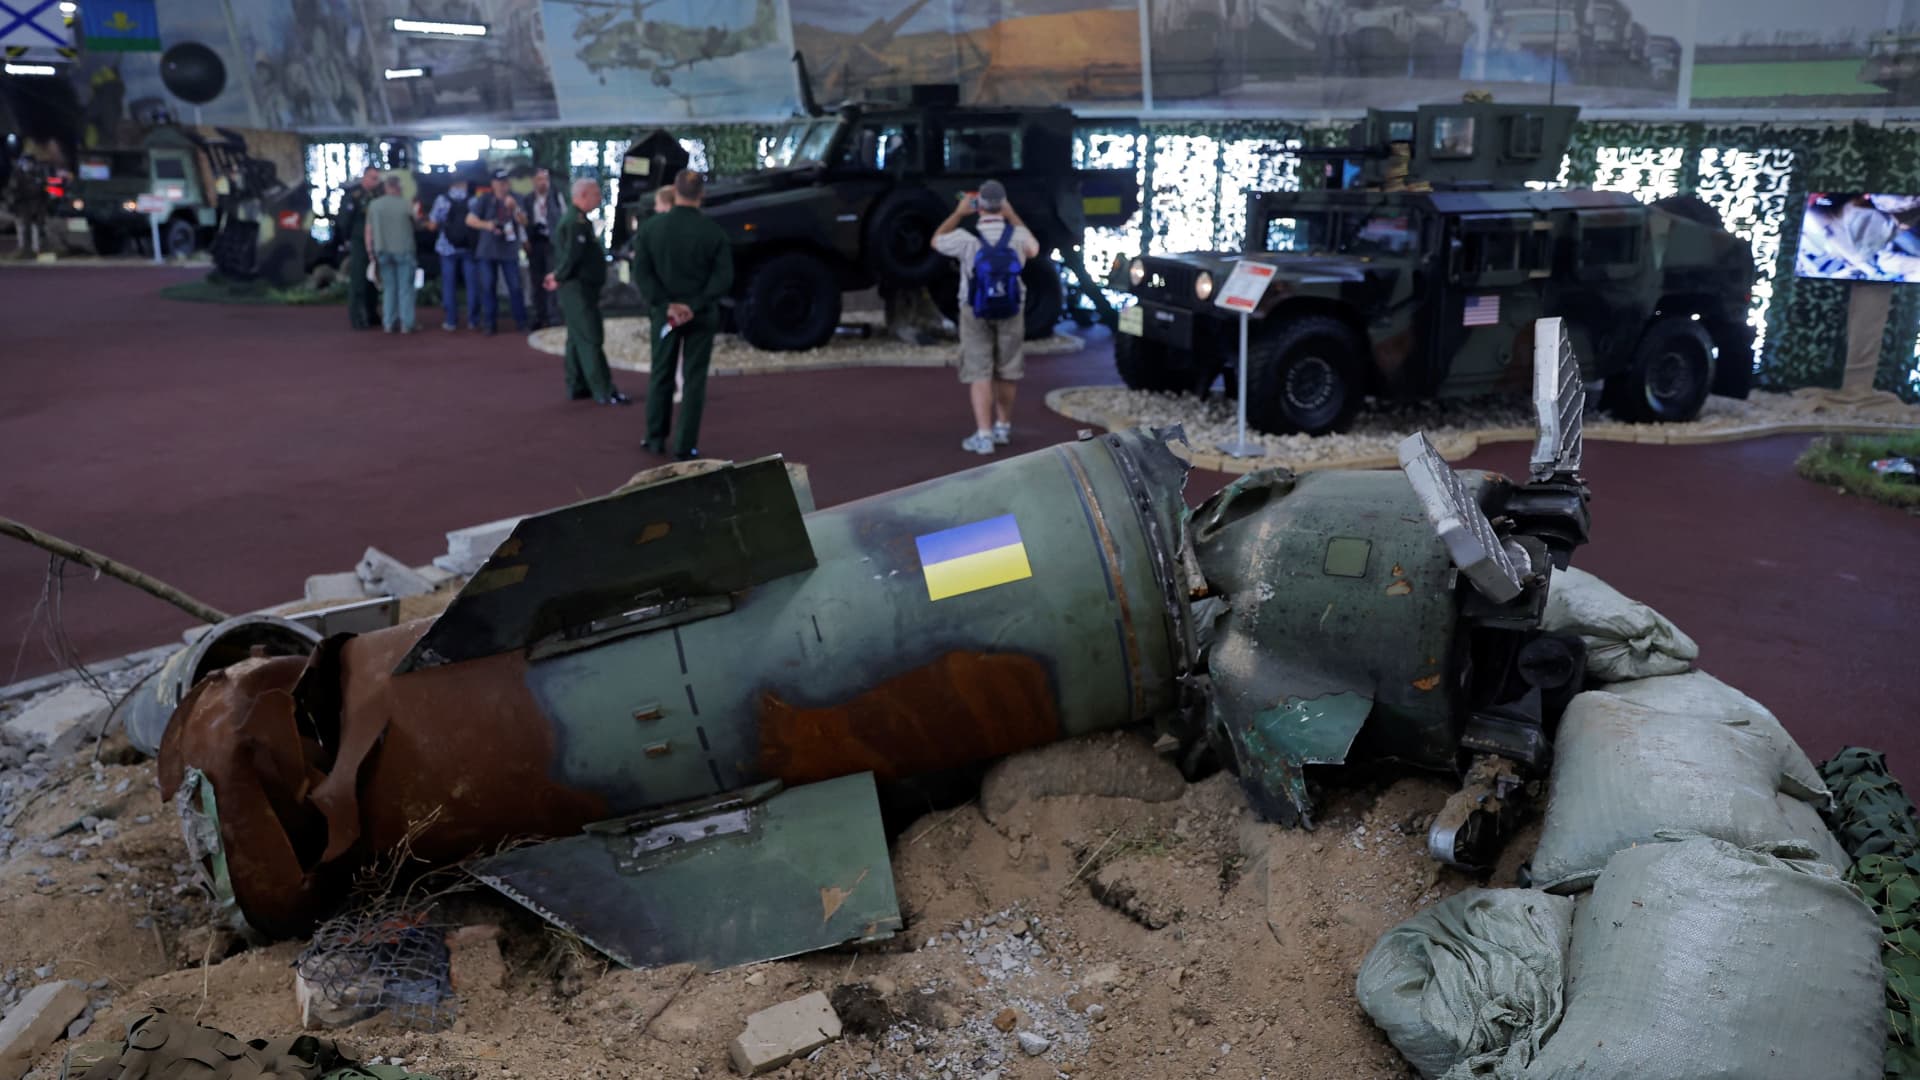 Remains of the Tochka-U missile are on display during the exhibition of weaponry and equipment that, according to the Russian defence ministry, were captured during the military conflict in Ukraine, at the international military-technical forum Army-2022 at Patriot Congress and Exhibition Centre in the Moscow region, Russia August 17, 2022. 